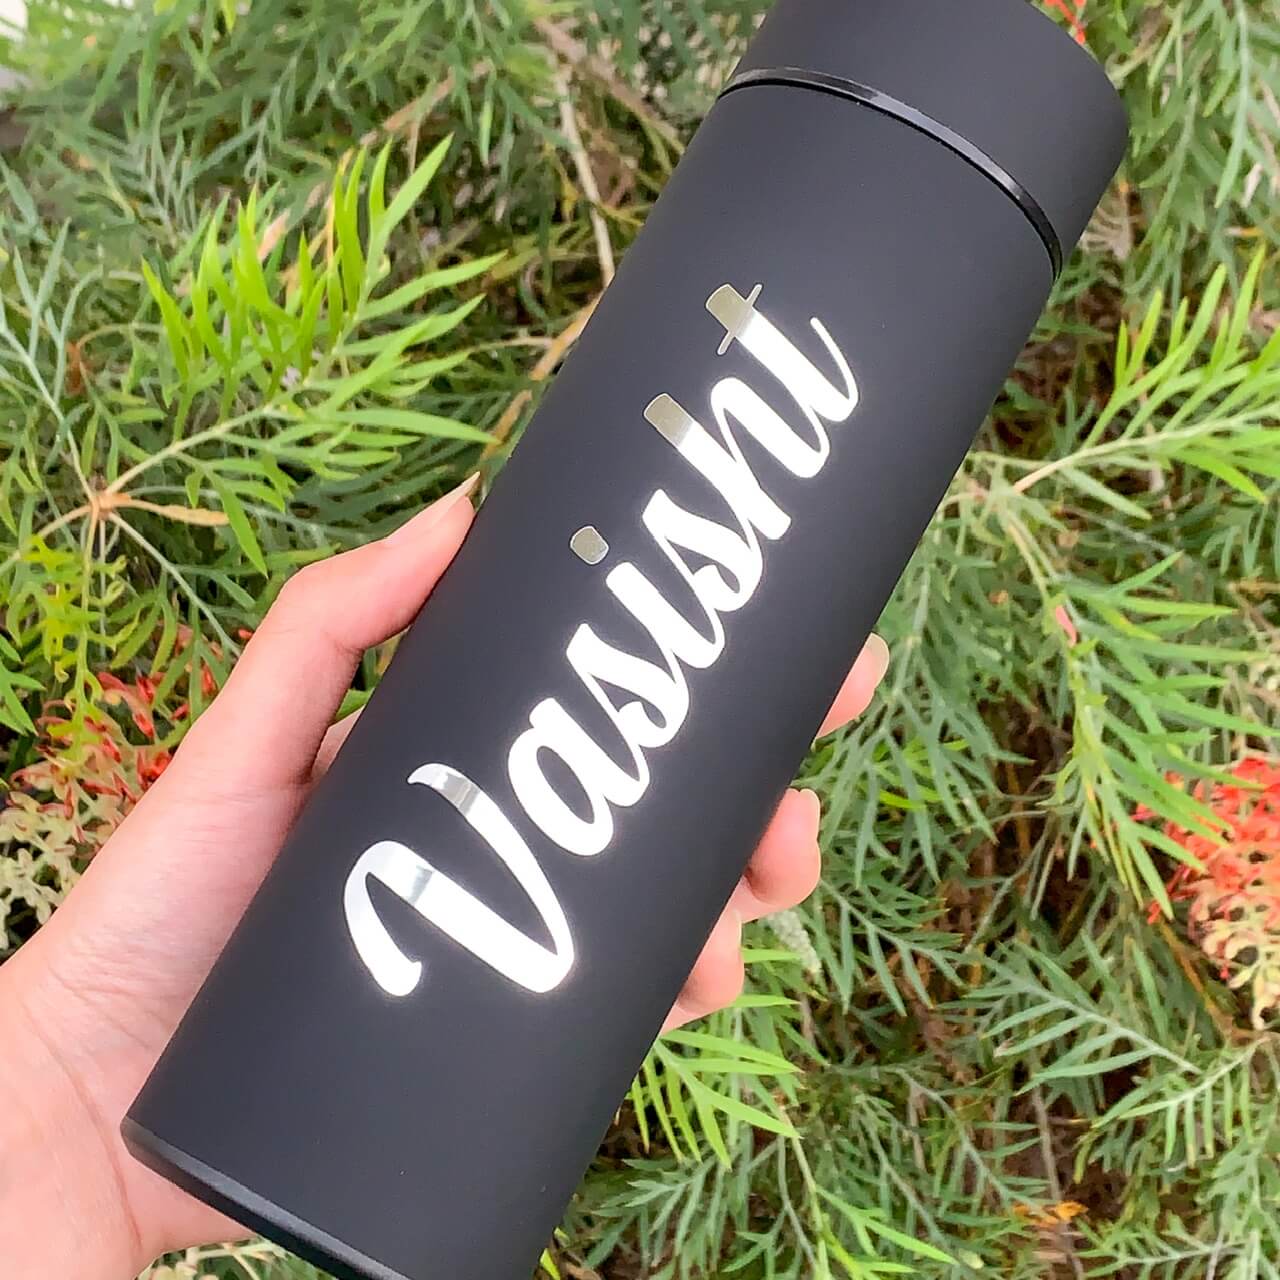 Personalised Name Stainless Steel LED Temperature display Flask Tumbler